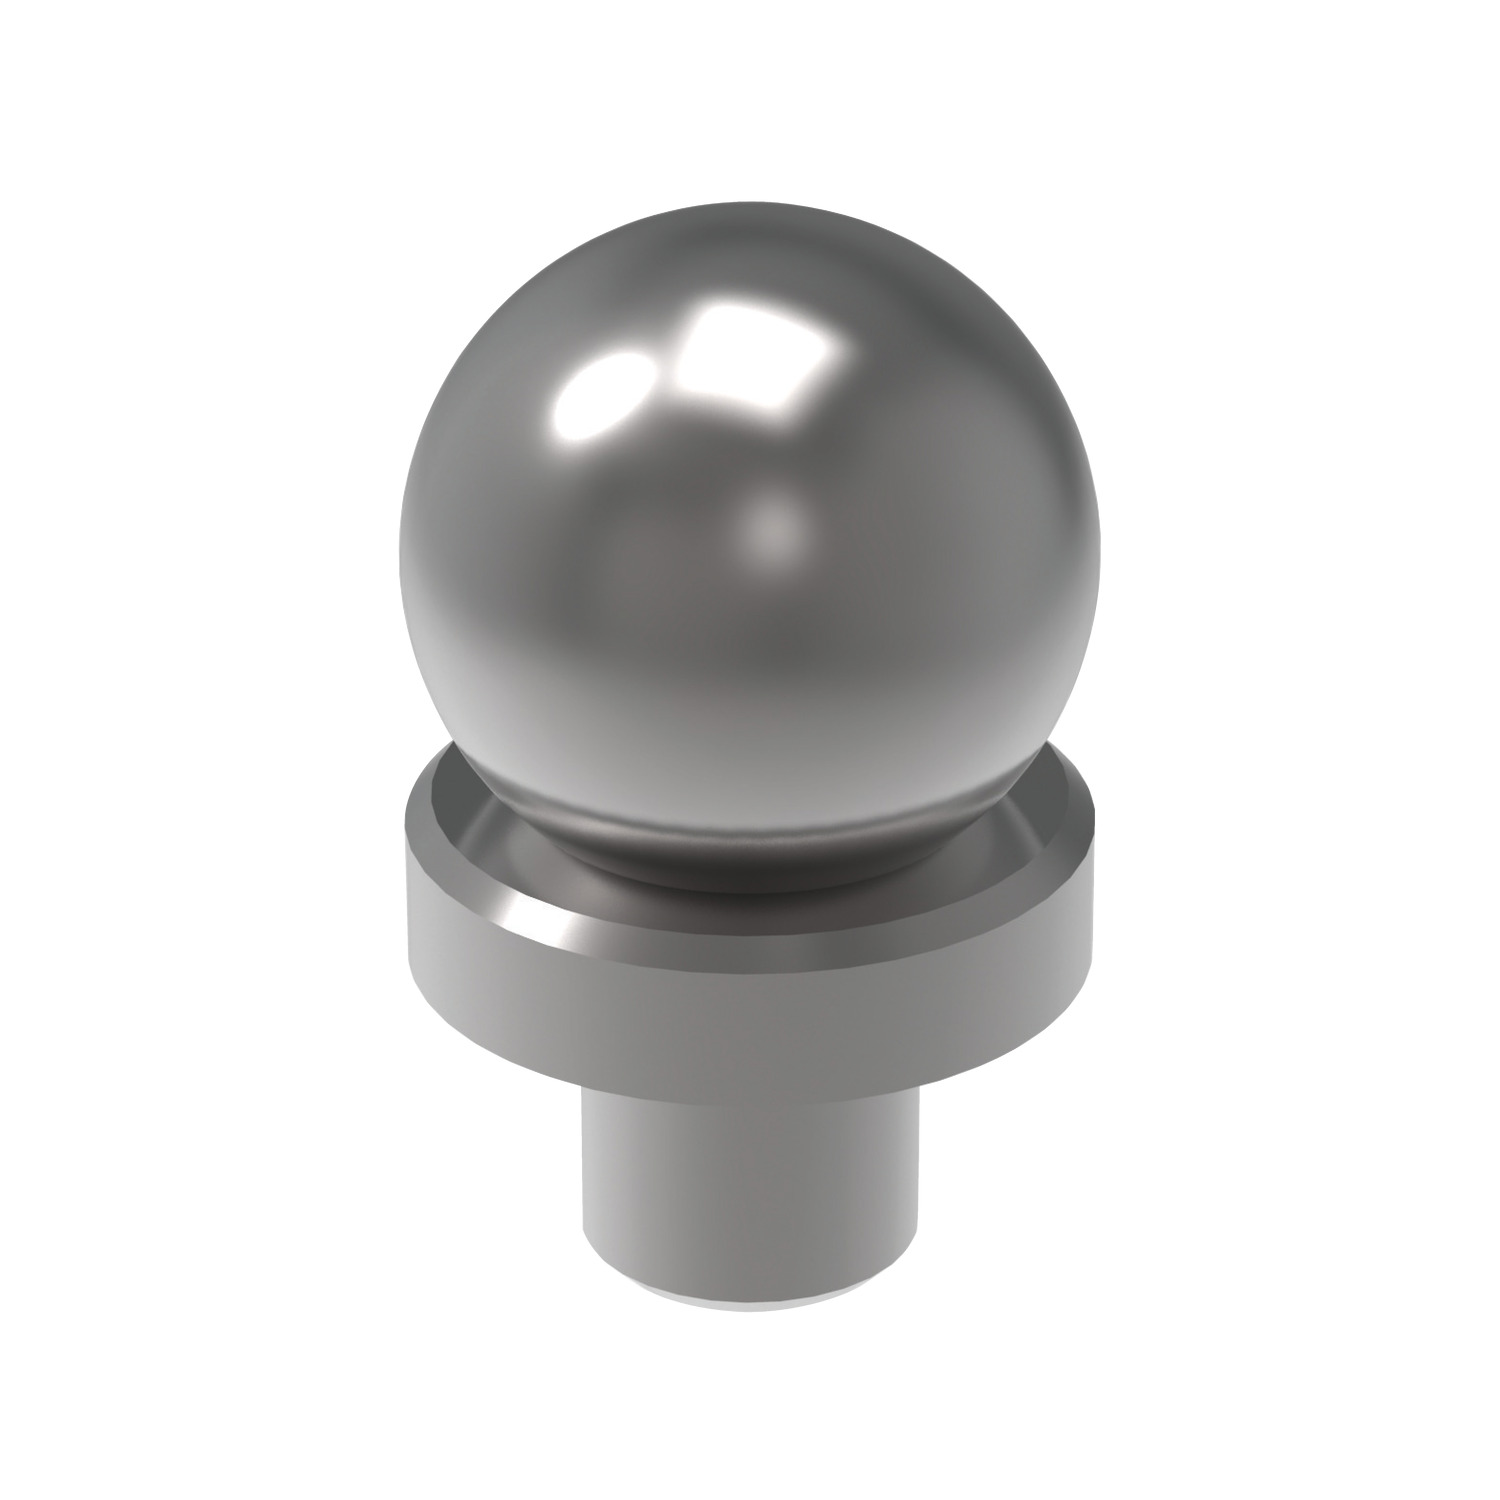 20500.W0051I Inspection Balls - Imperial - Steel. 0,5000 - 0,2497 - 0,93 - 0,4000